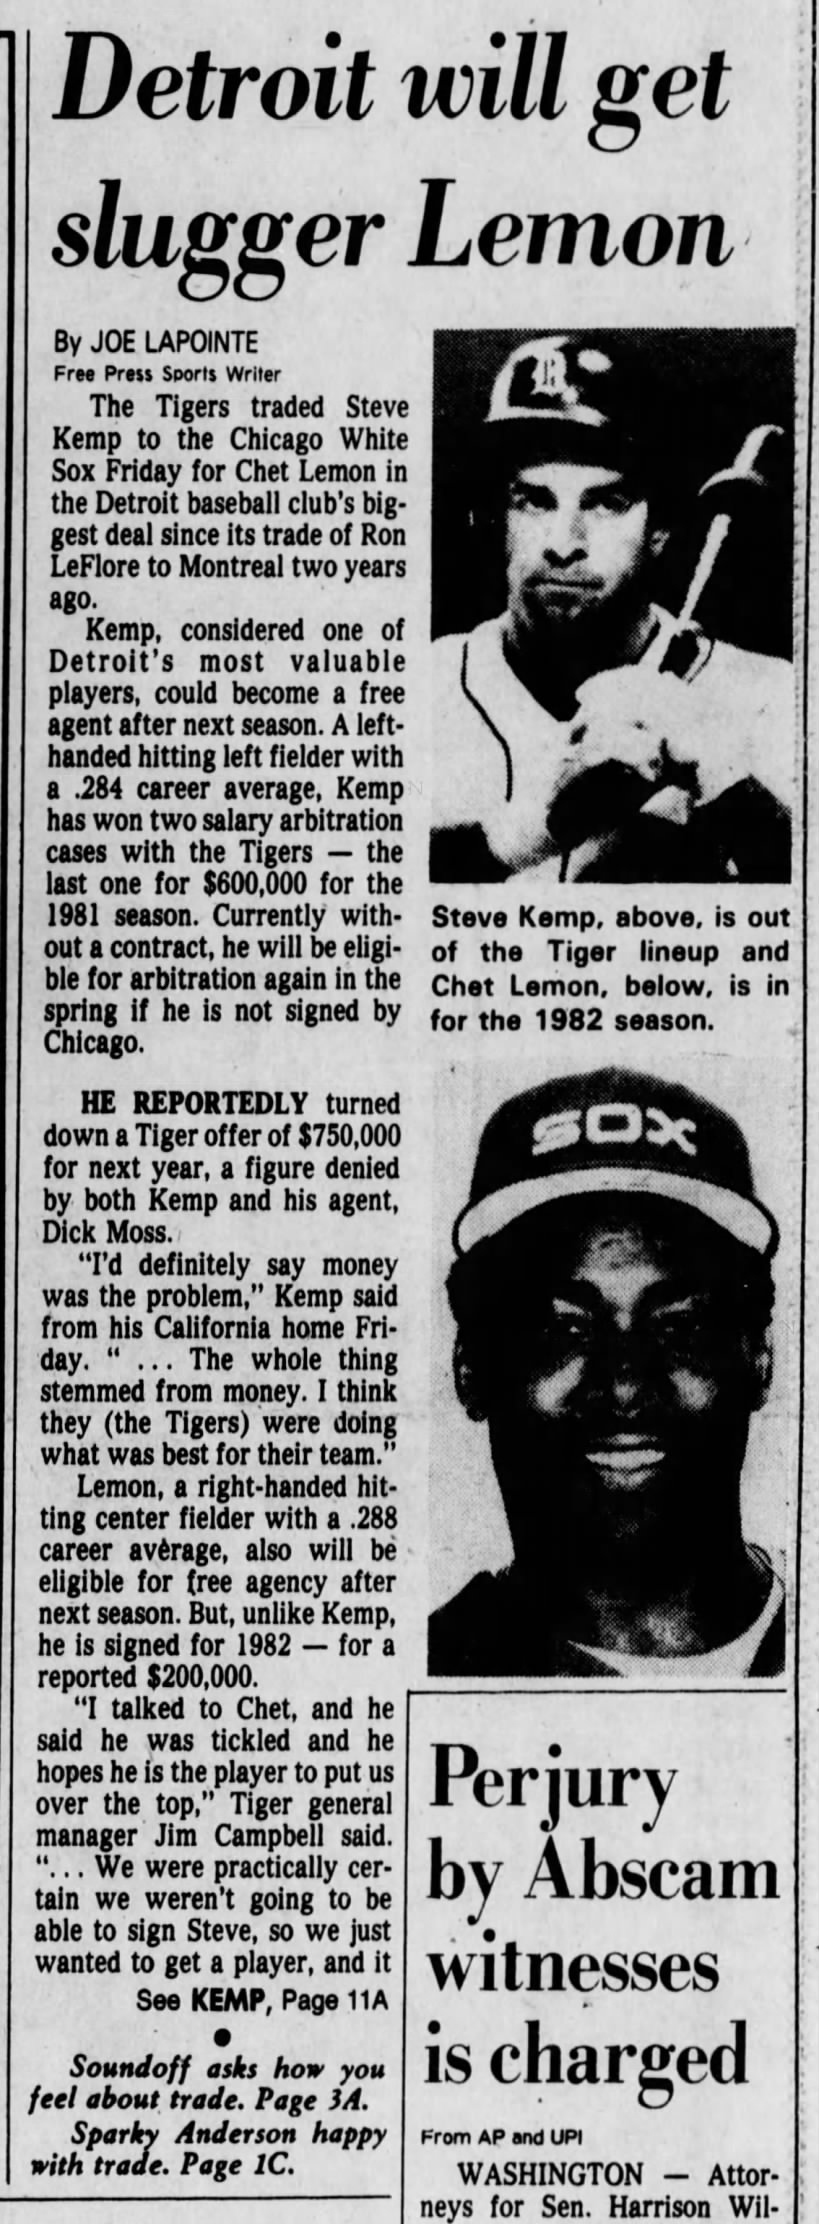 Sat 11/28/81: Lemon-Kemp  trade - front page coverage (pg 1 of 2)